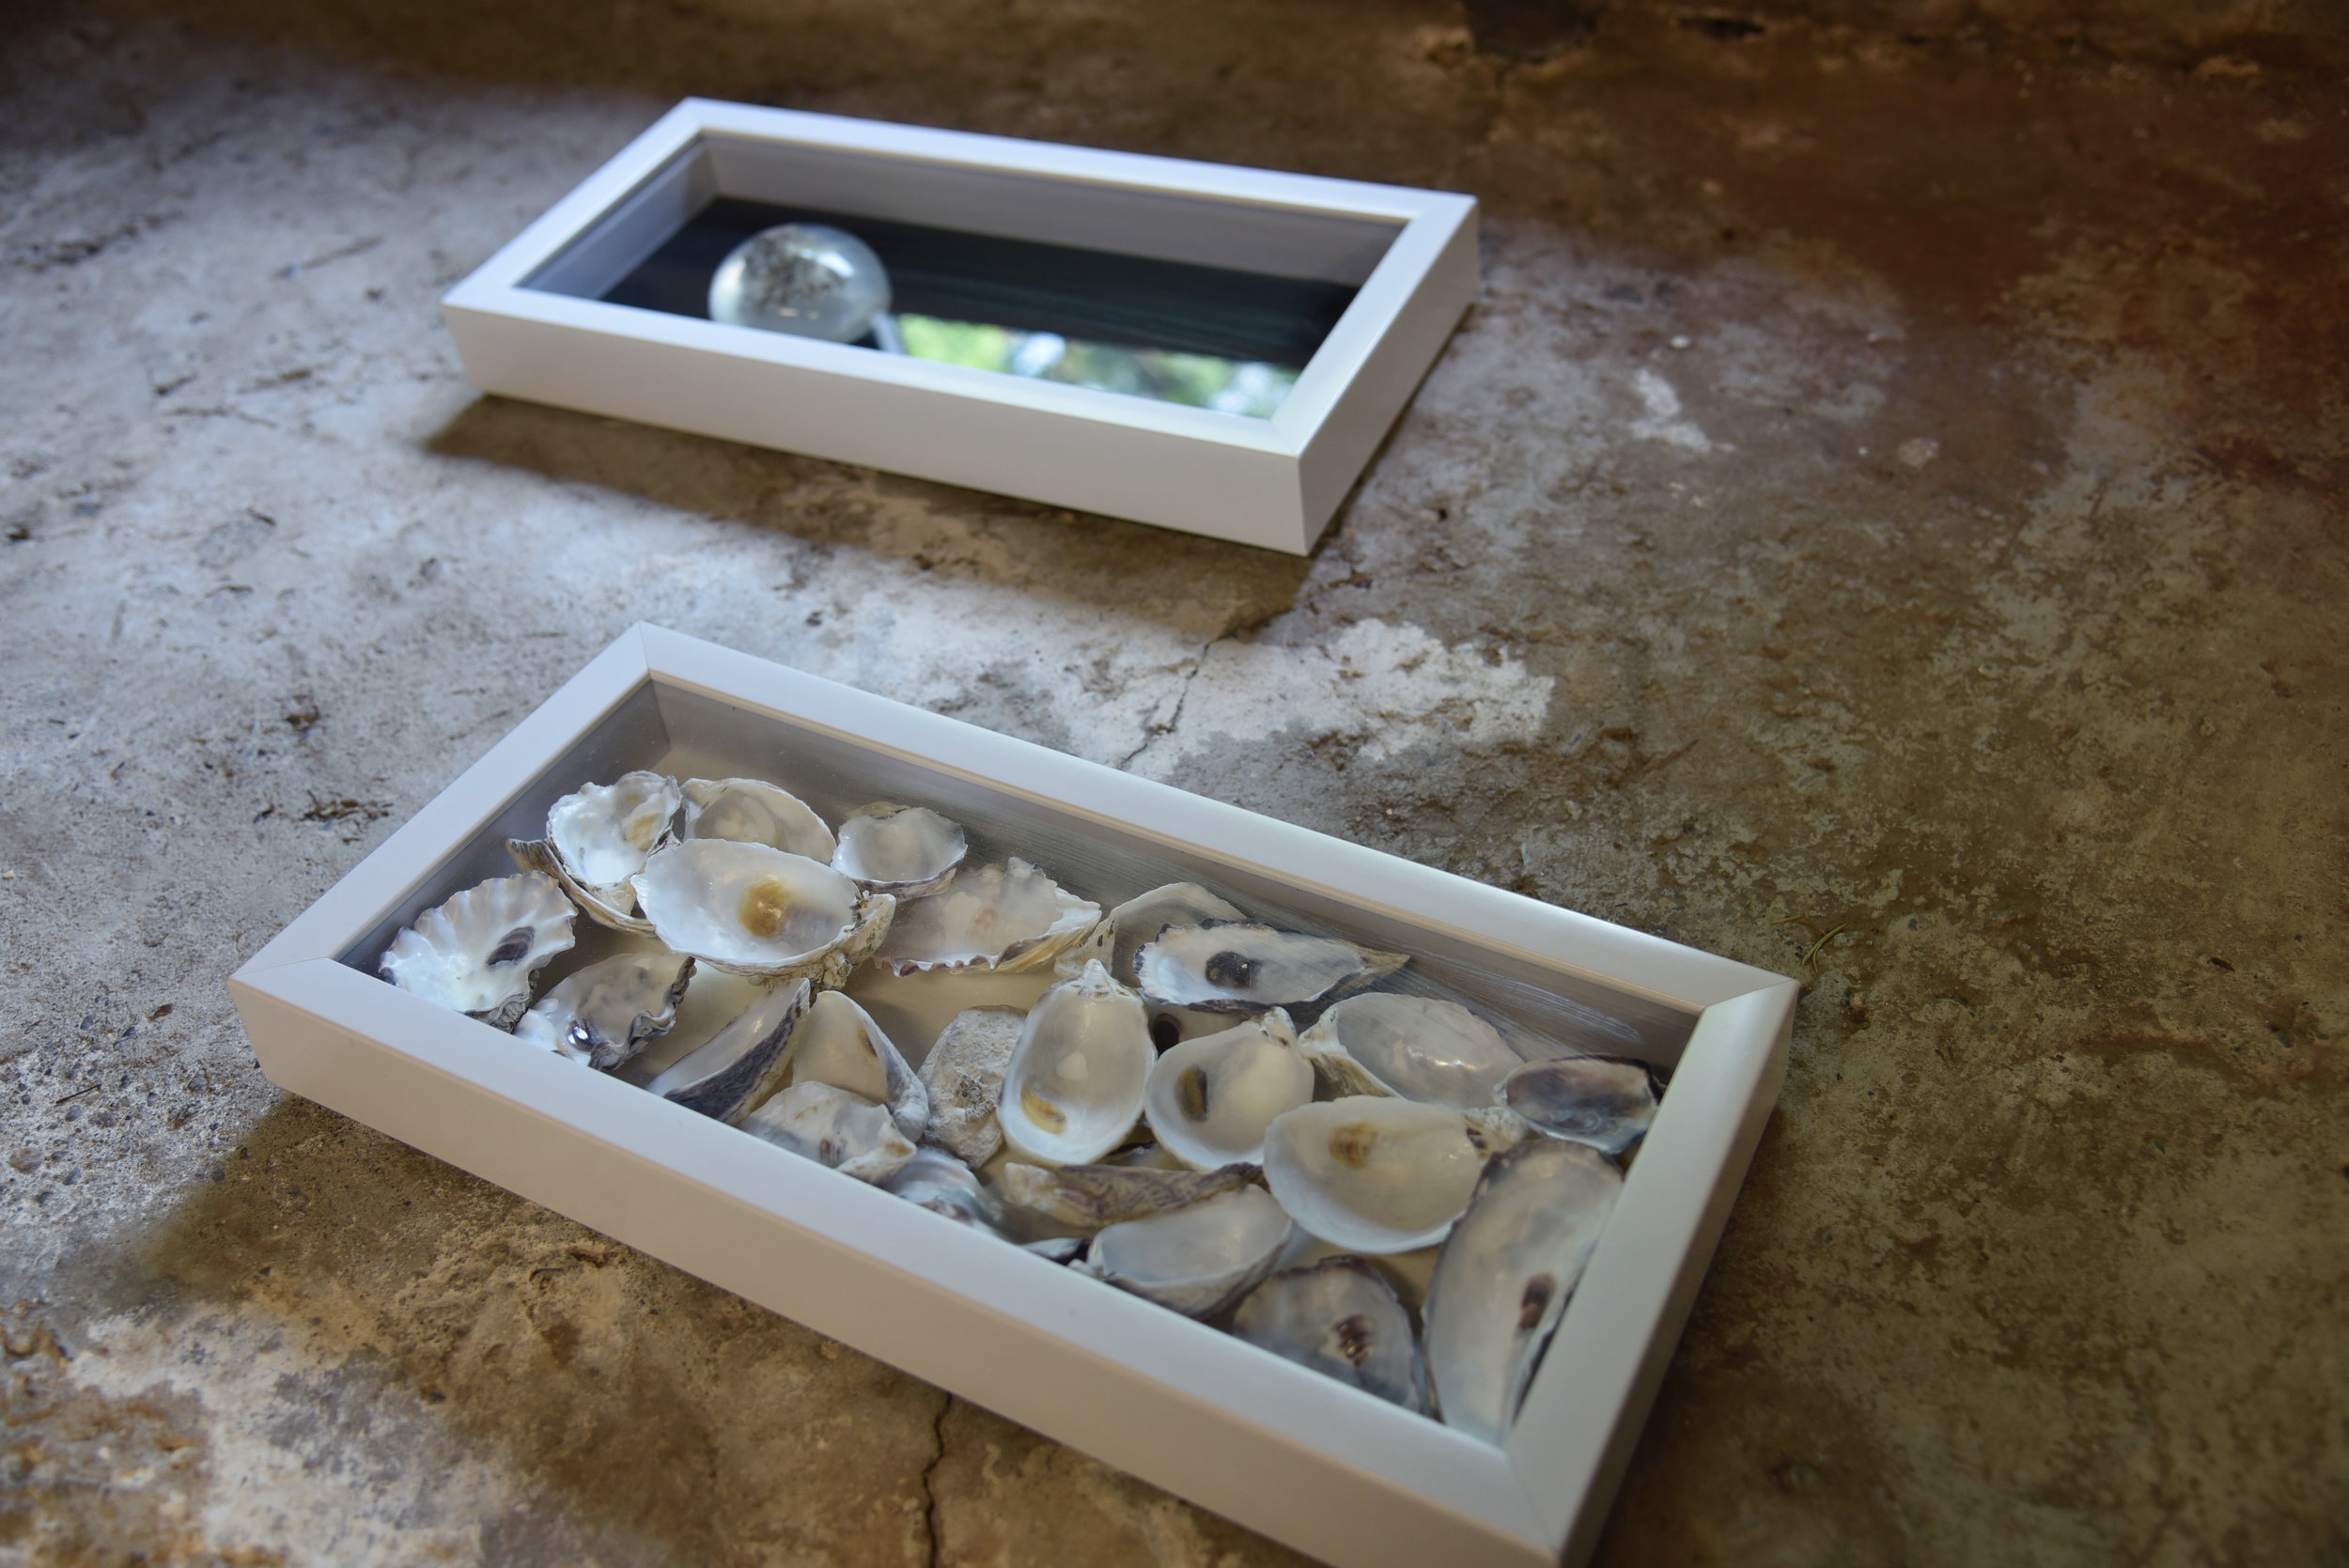   No one will get in but no one will get out.   oyster shells, 2017   Work Statement + Info  